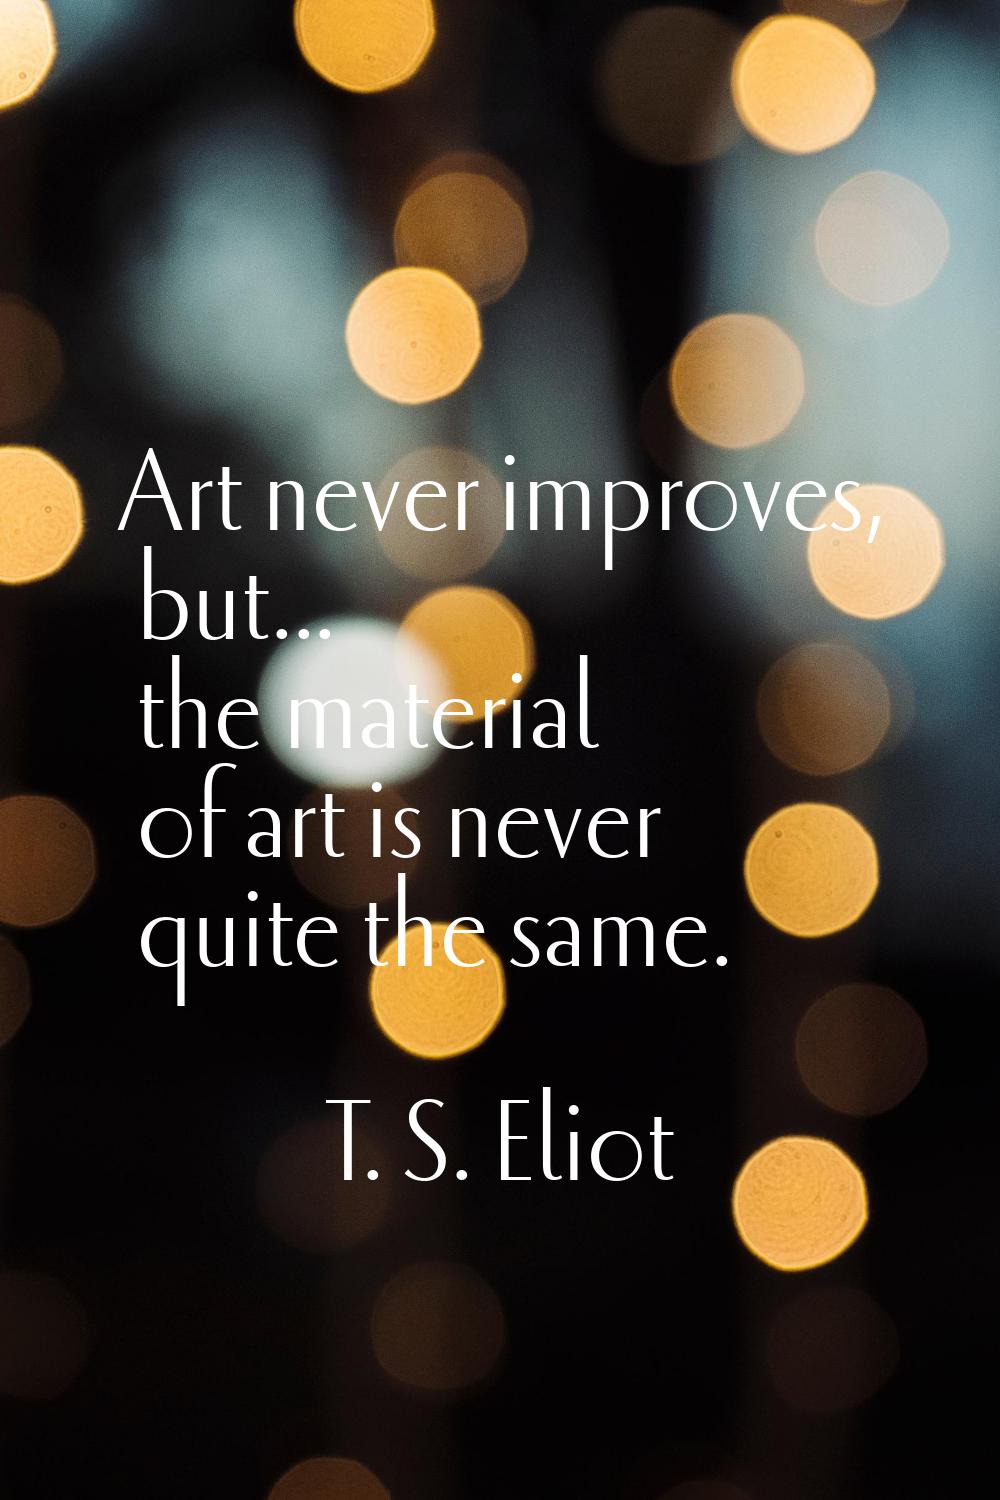 Art never improves, but... the material of art is never quite the same.